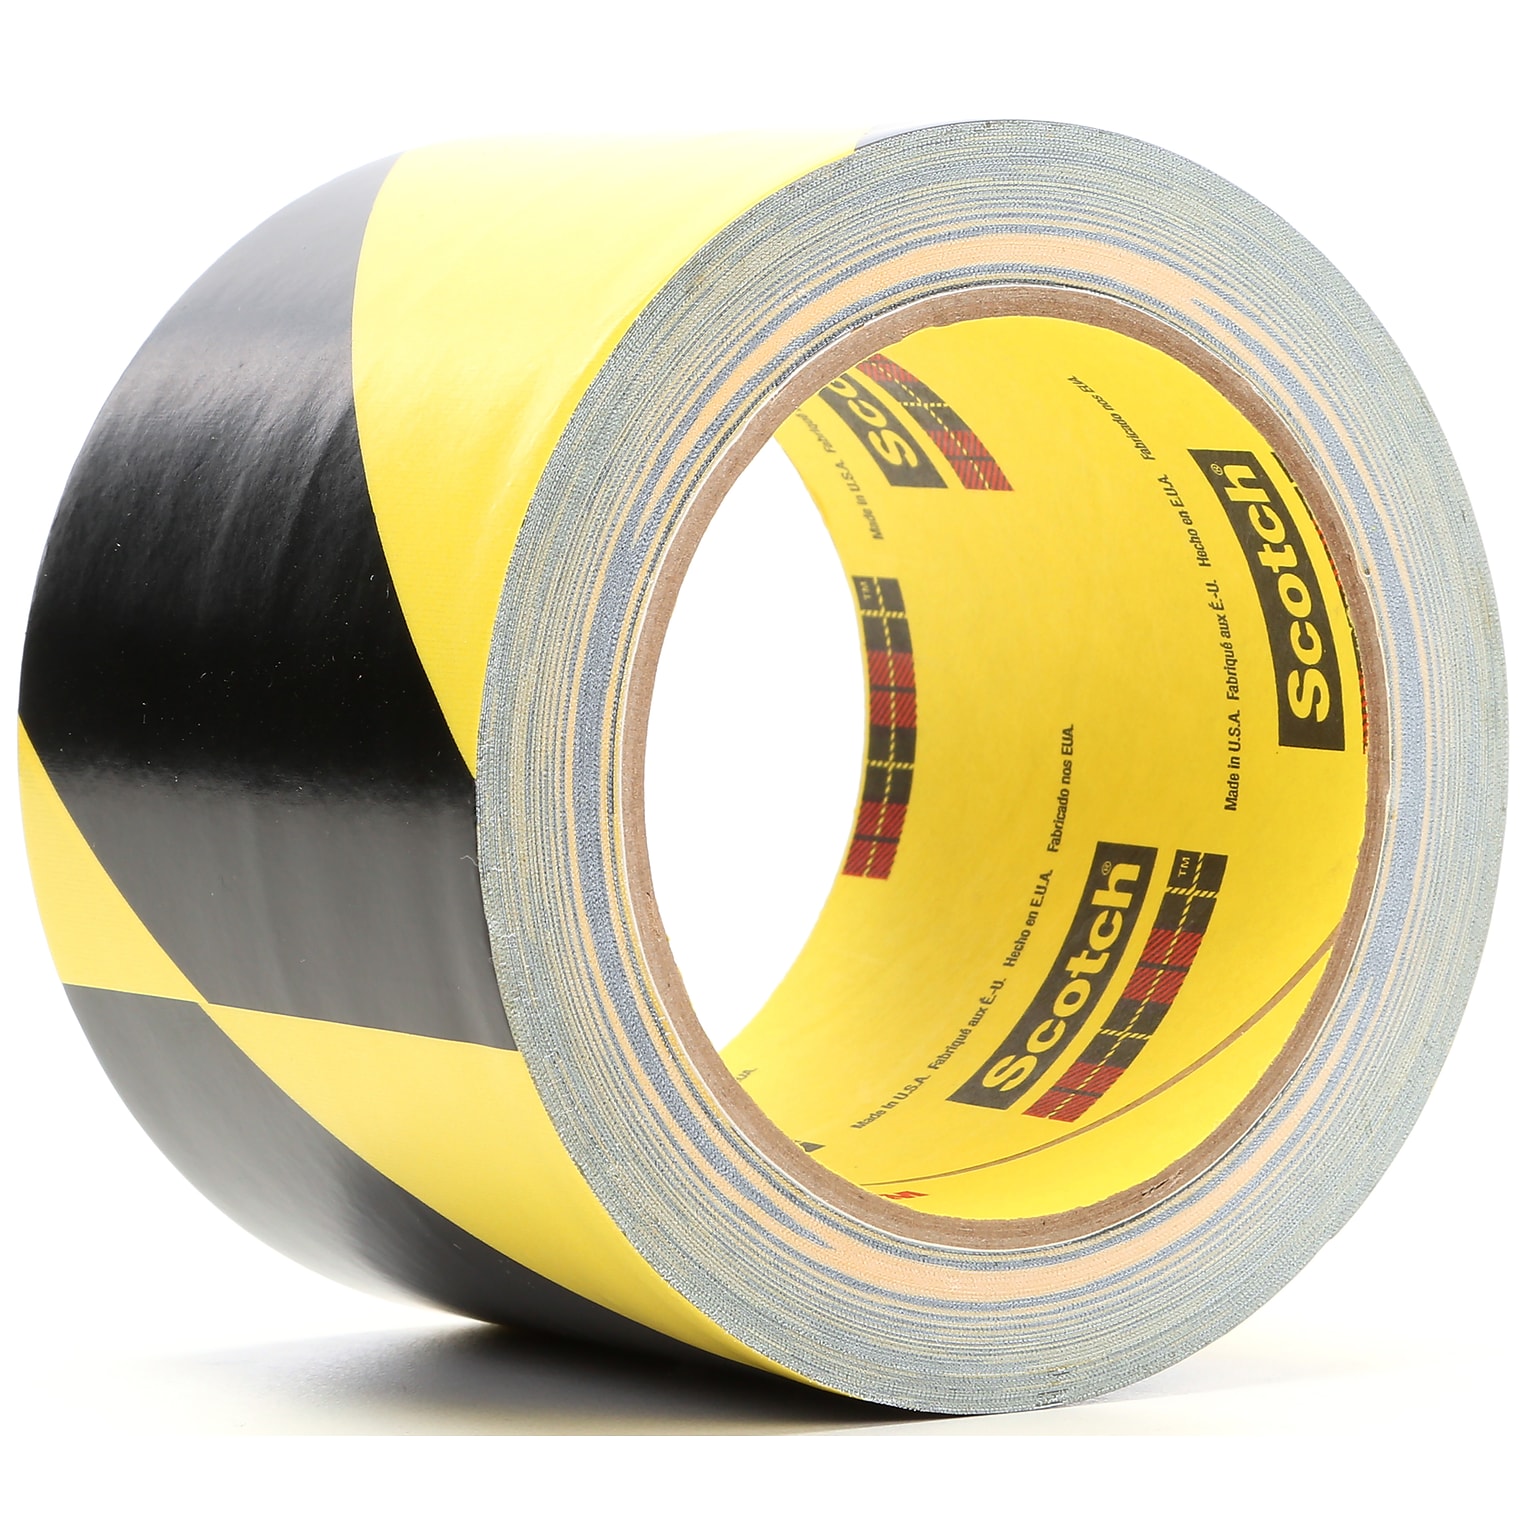 3M Striped Safety Tape, 2 x 36 yds., Black/Yellow (5702)